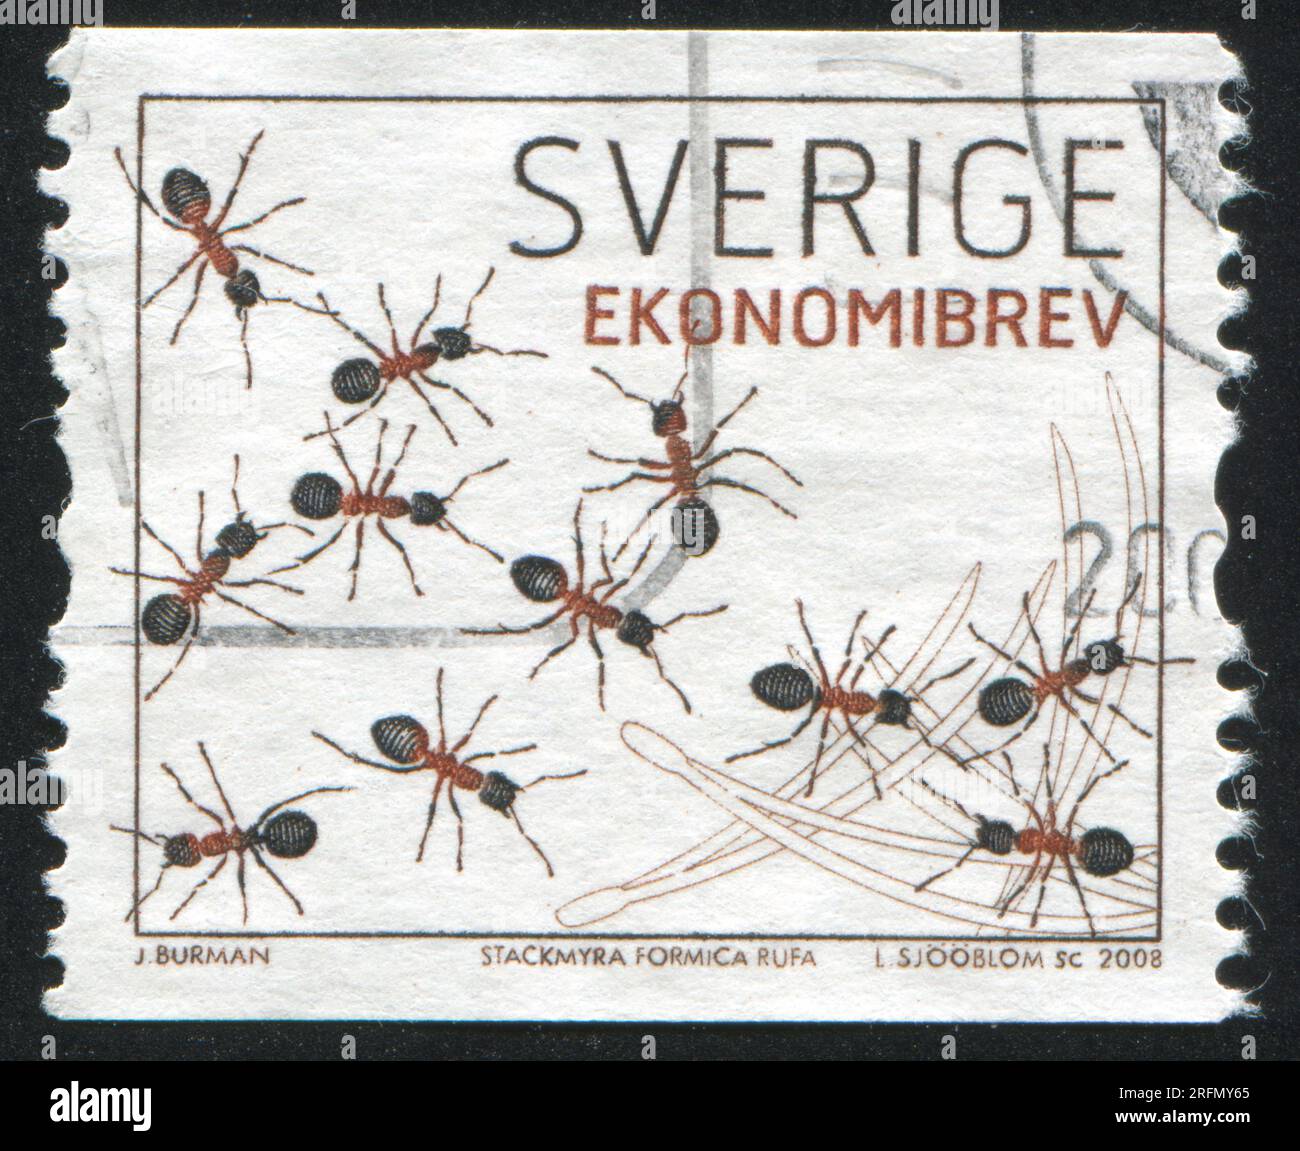 SWEDEN - CIRCA 2008: stamp printed by Sweden, shows Ants, circa 2008 Stock Photo